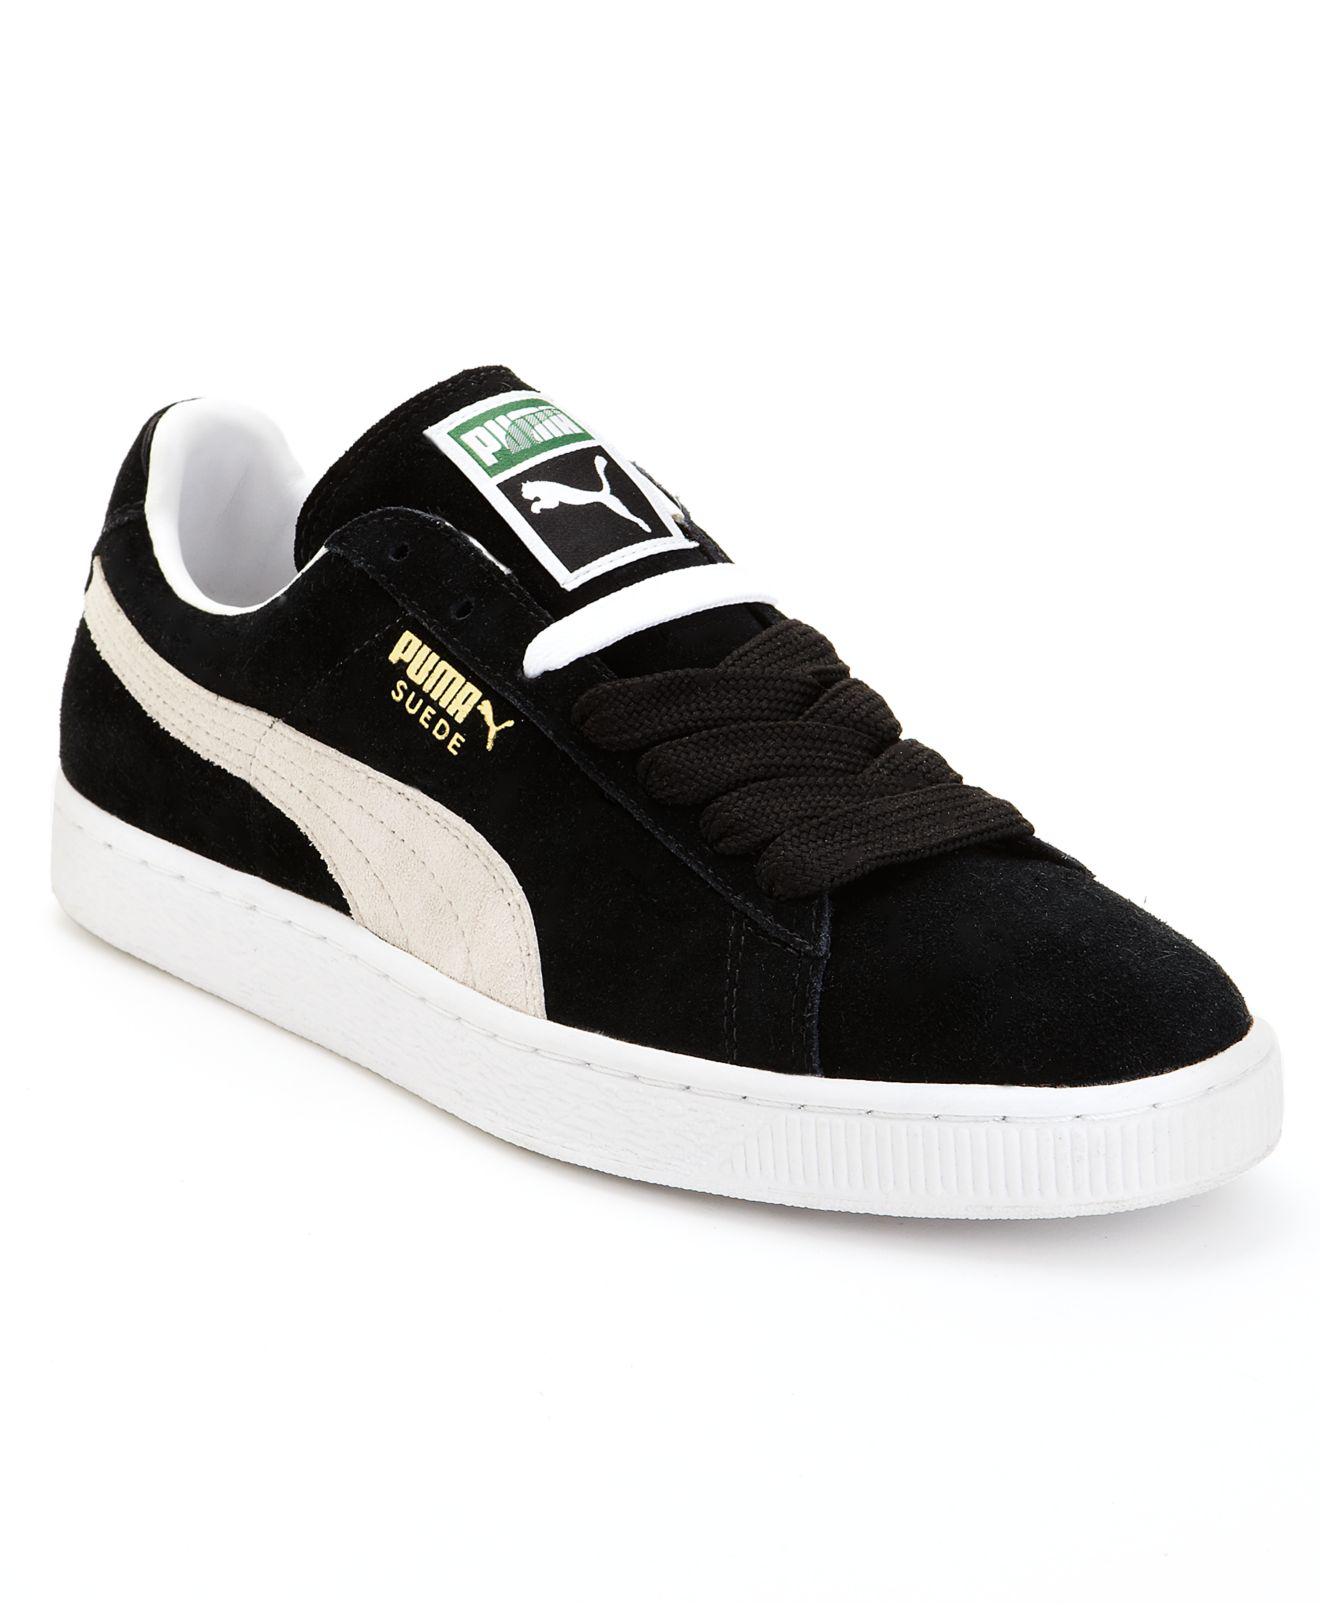 Lyst Puma Men's Suede Classic+ Sneakers From Finish Line